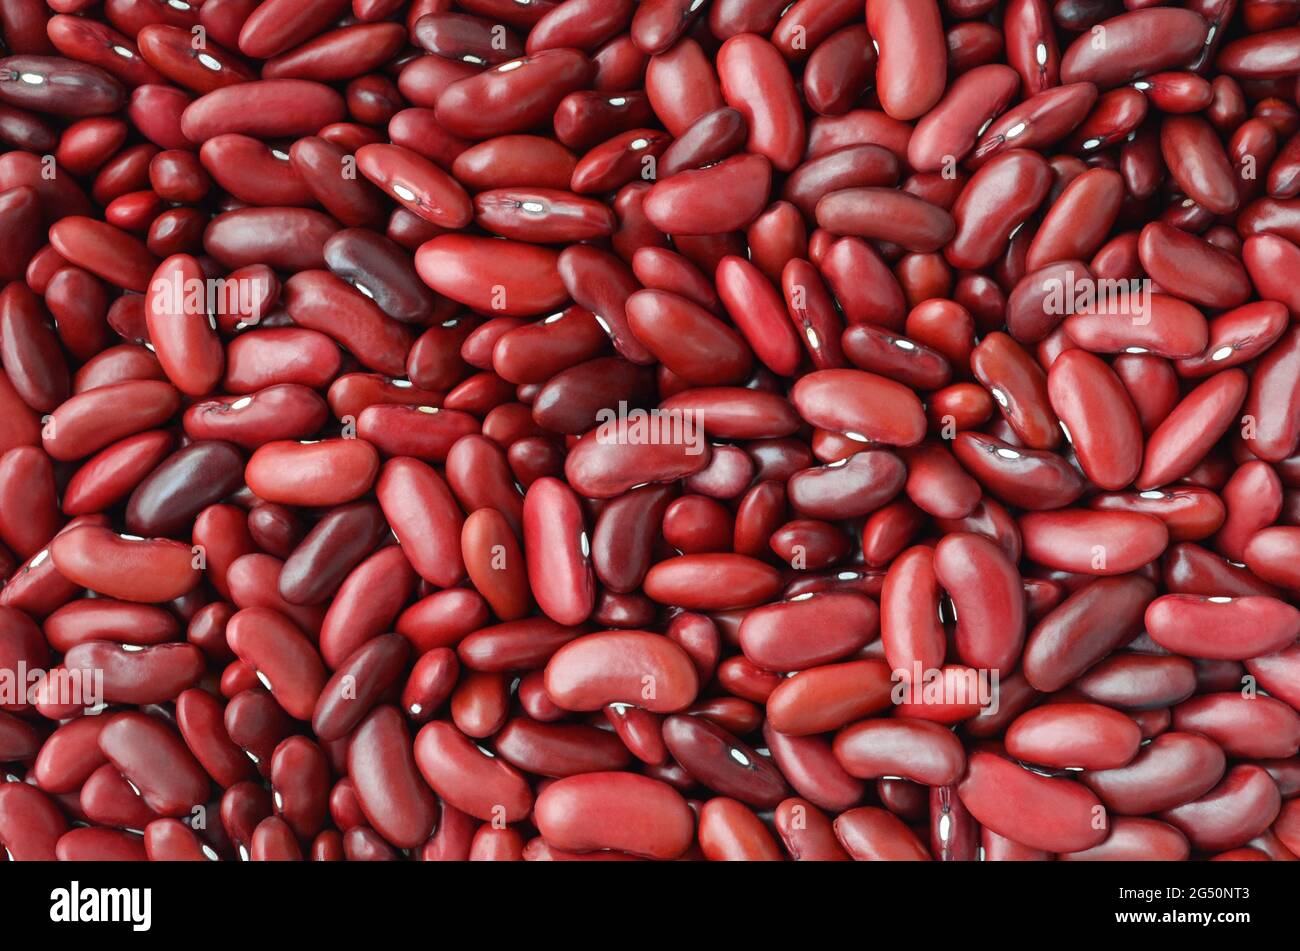 Red beans or phaseolus vulgaris on a full frame as a background. Stock Photo